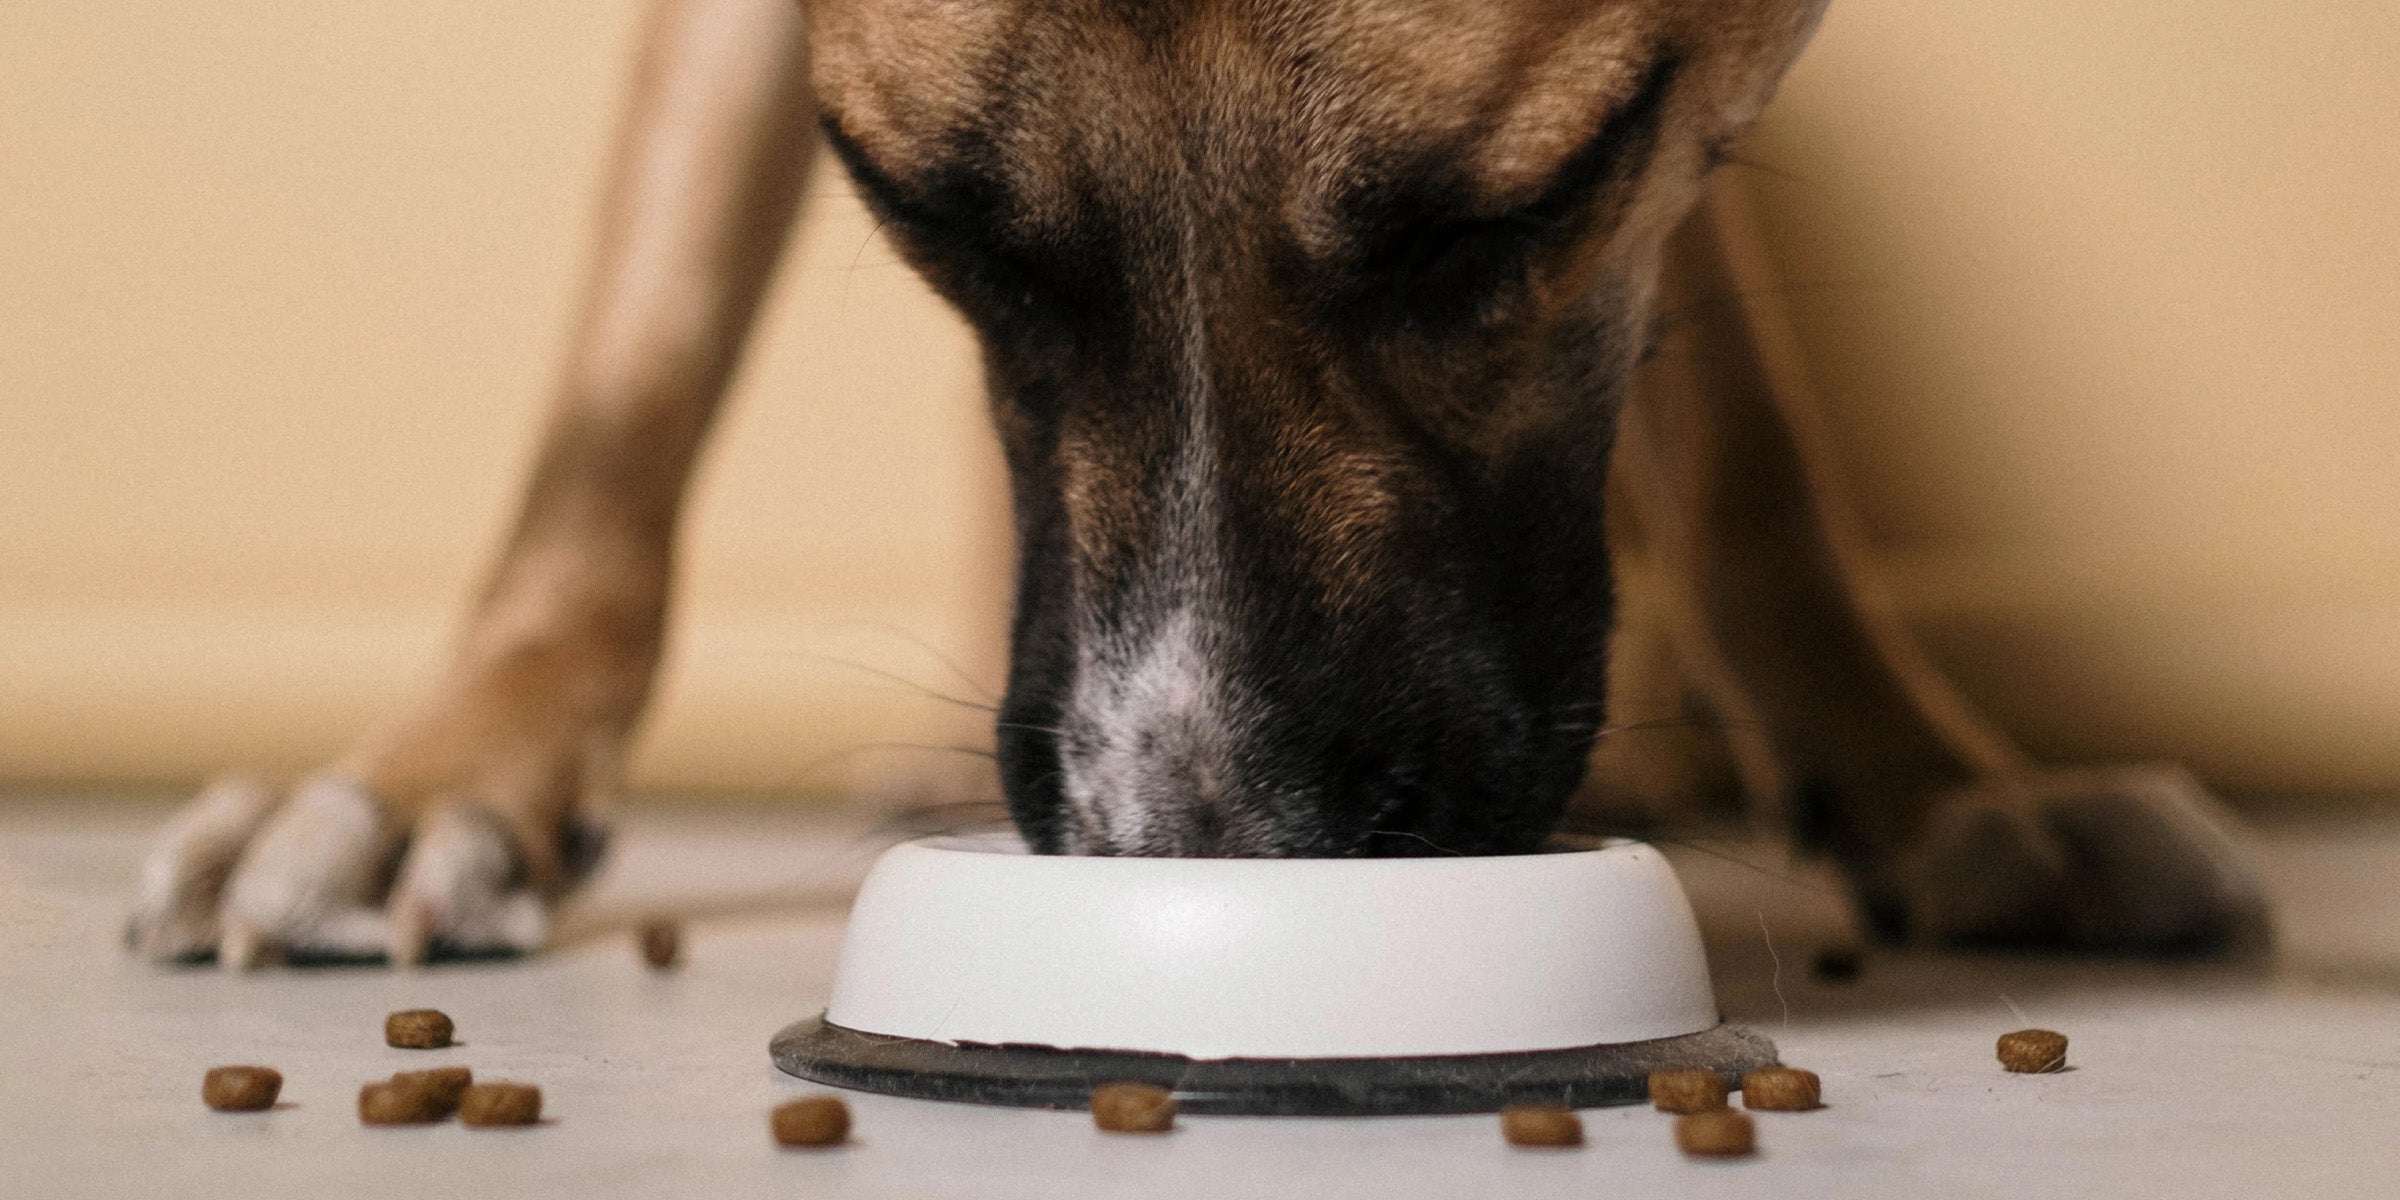 Dog eating food from dog bowl